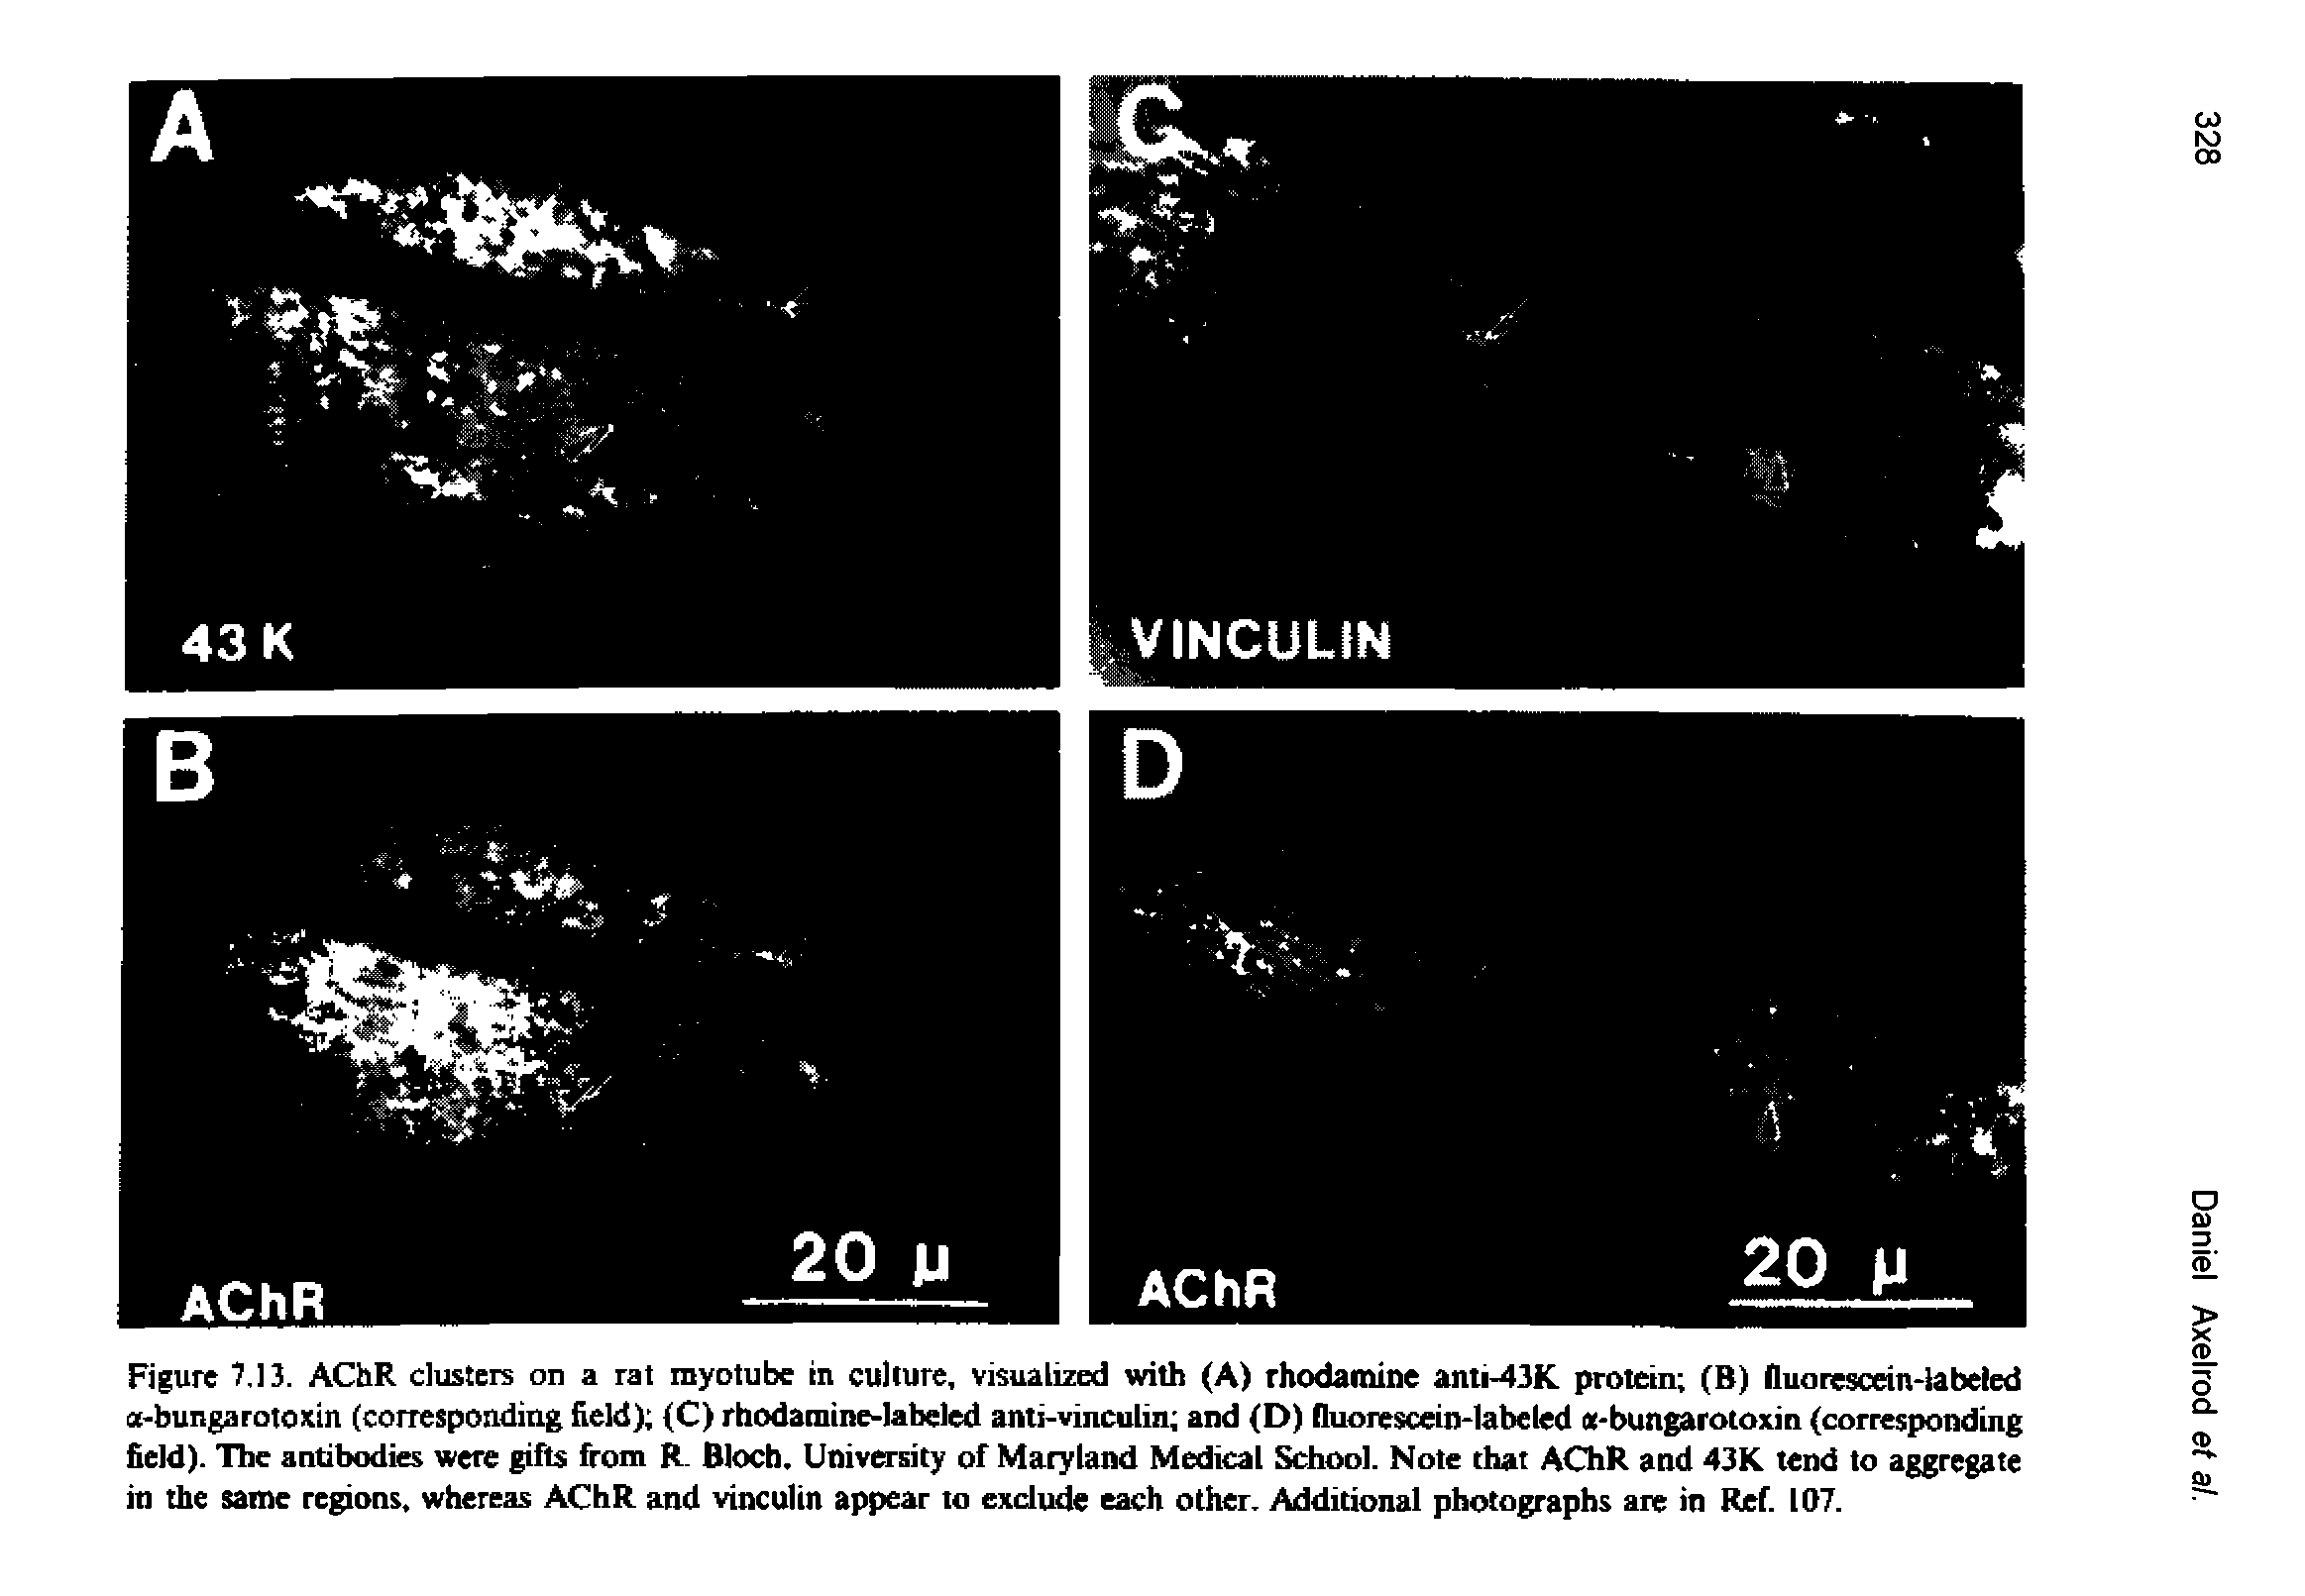 Figure 7,13. AChR dusters on a rat rayotube in culture, visualized with (A) rhodamine anti-43K protein (B) fluorescein-labeled a-bungarotoxin (corresponding field) (C) rhodamine-labeled anti-vinculin and (D) fluorescein-labeled g-bungarotoxin (corresponding field). The antibodies were gifts from R. Bloch. University of Maryland Medical School. Note that AChR and 43K tend to aggregate in the same regions, whereas AChR and vinculin appear to exdude each other. Additional photographs are in Ref. 107.